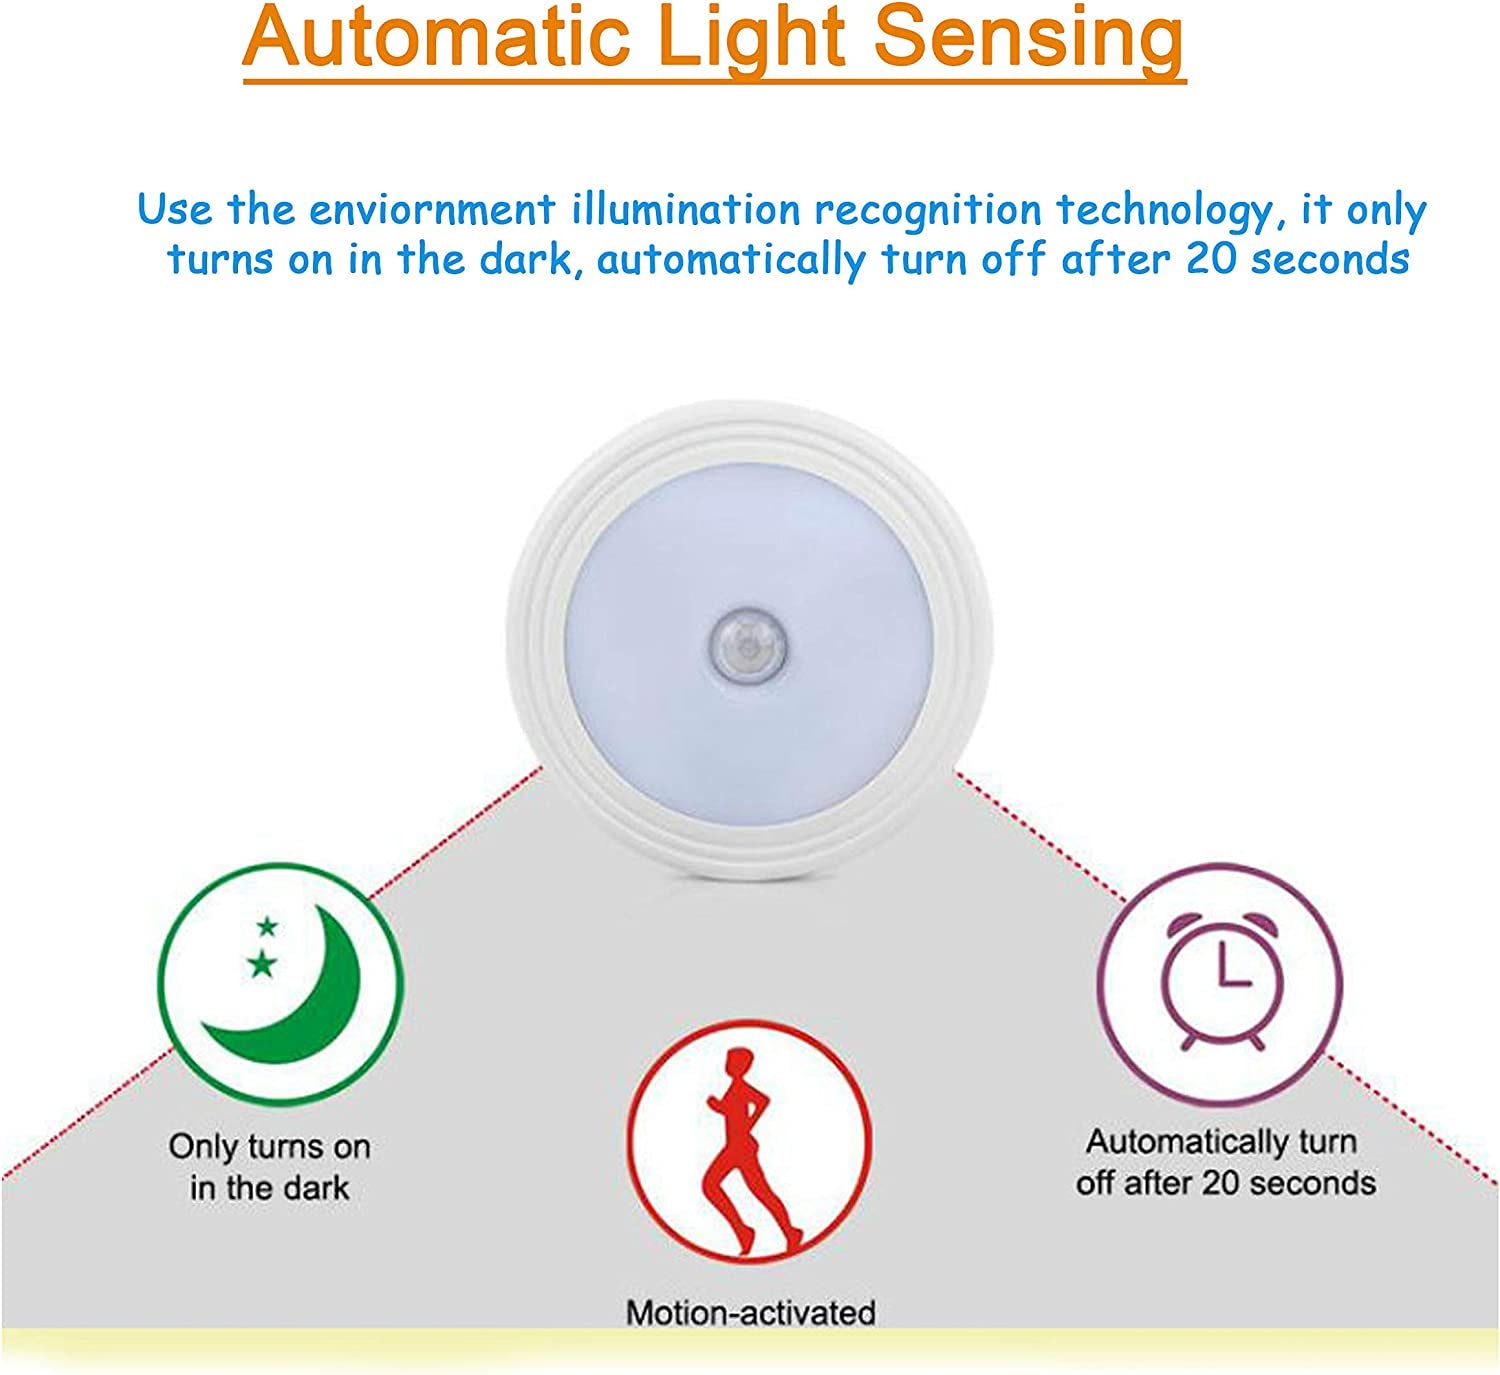 Motion Sensor LED Mailbox Light - Automatically Illuminates The Interior of Your Mailbox, When The Mailbox Door is Opened to See What is in There!